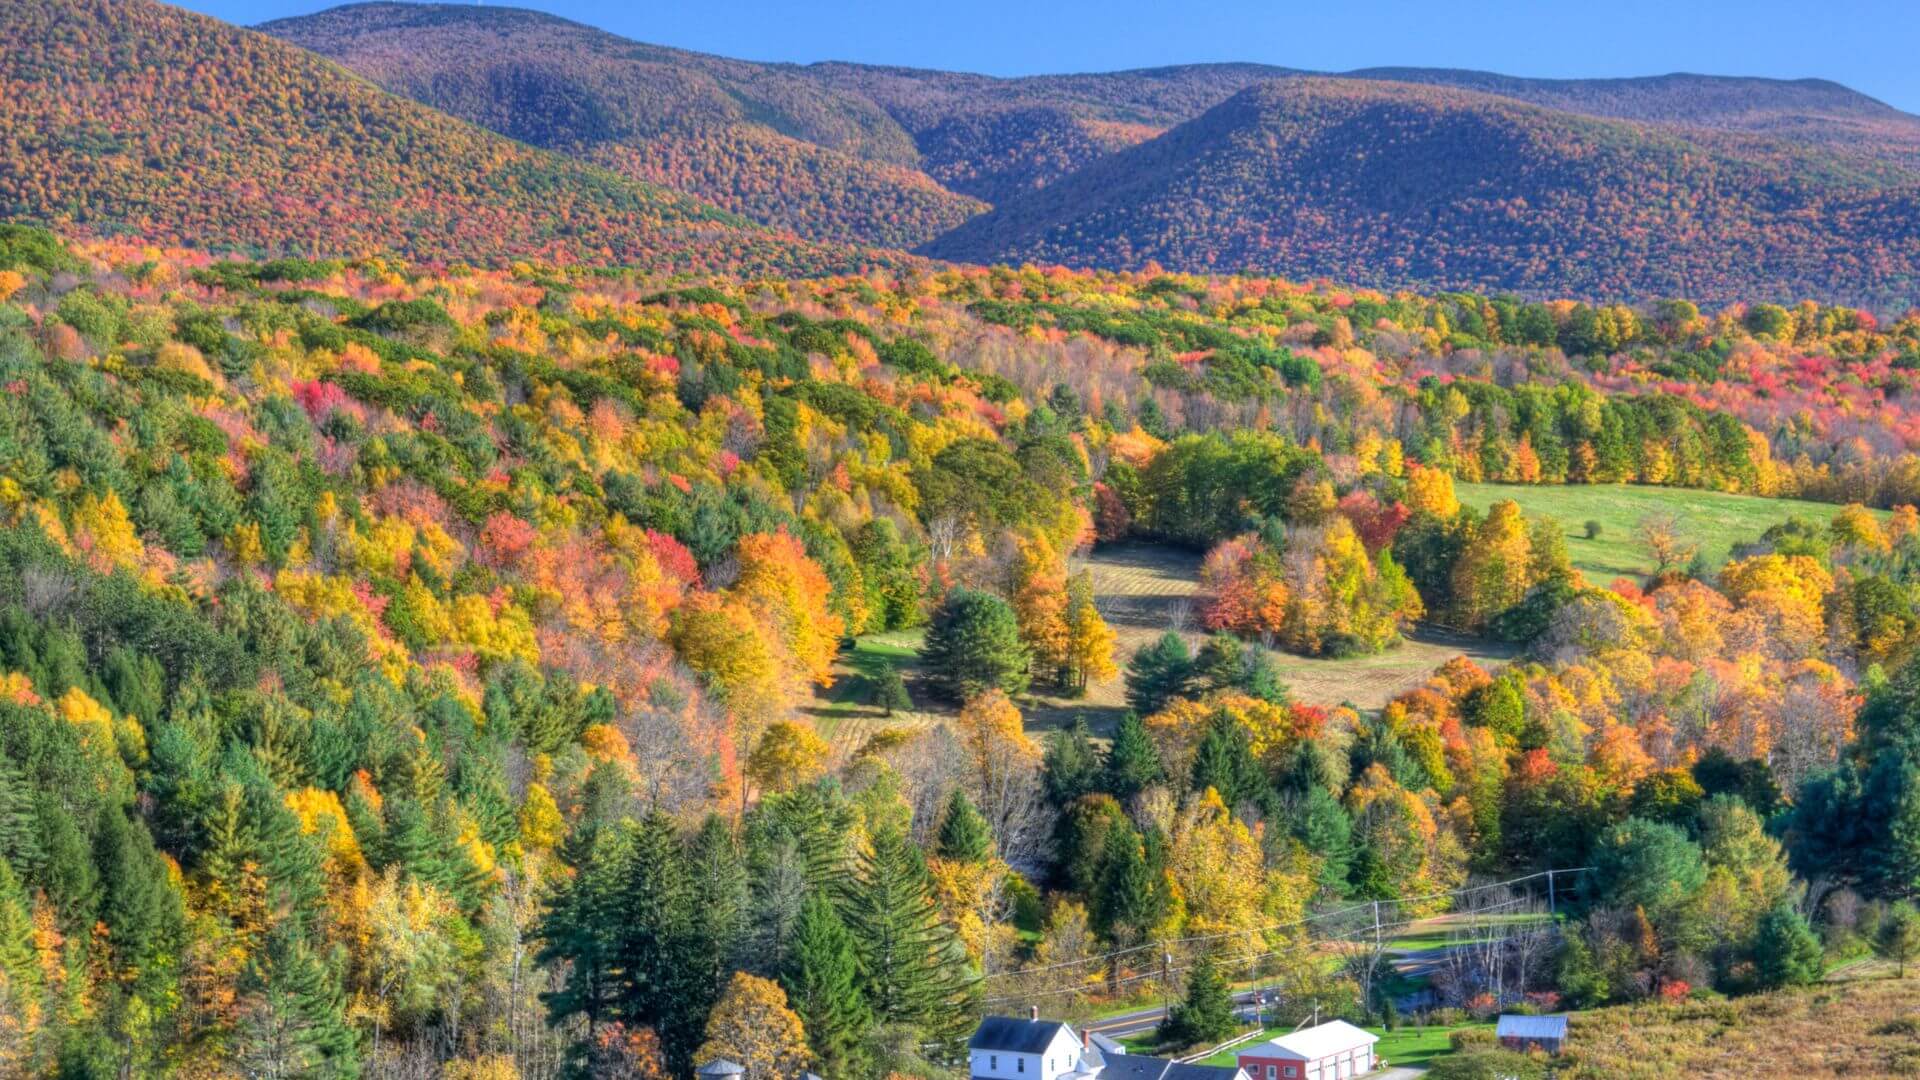 The Berkshires hills bursting with fall foliage in autumn